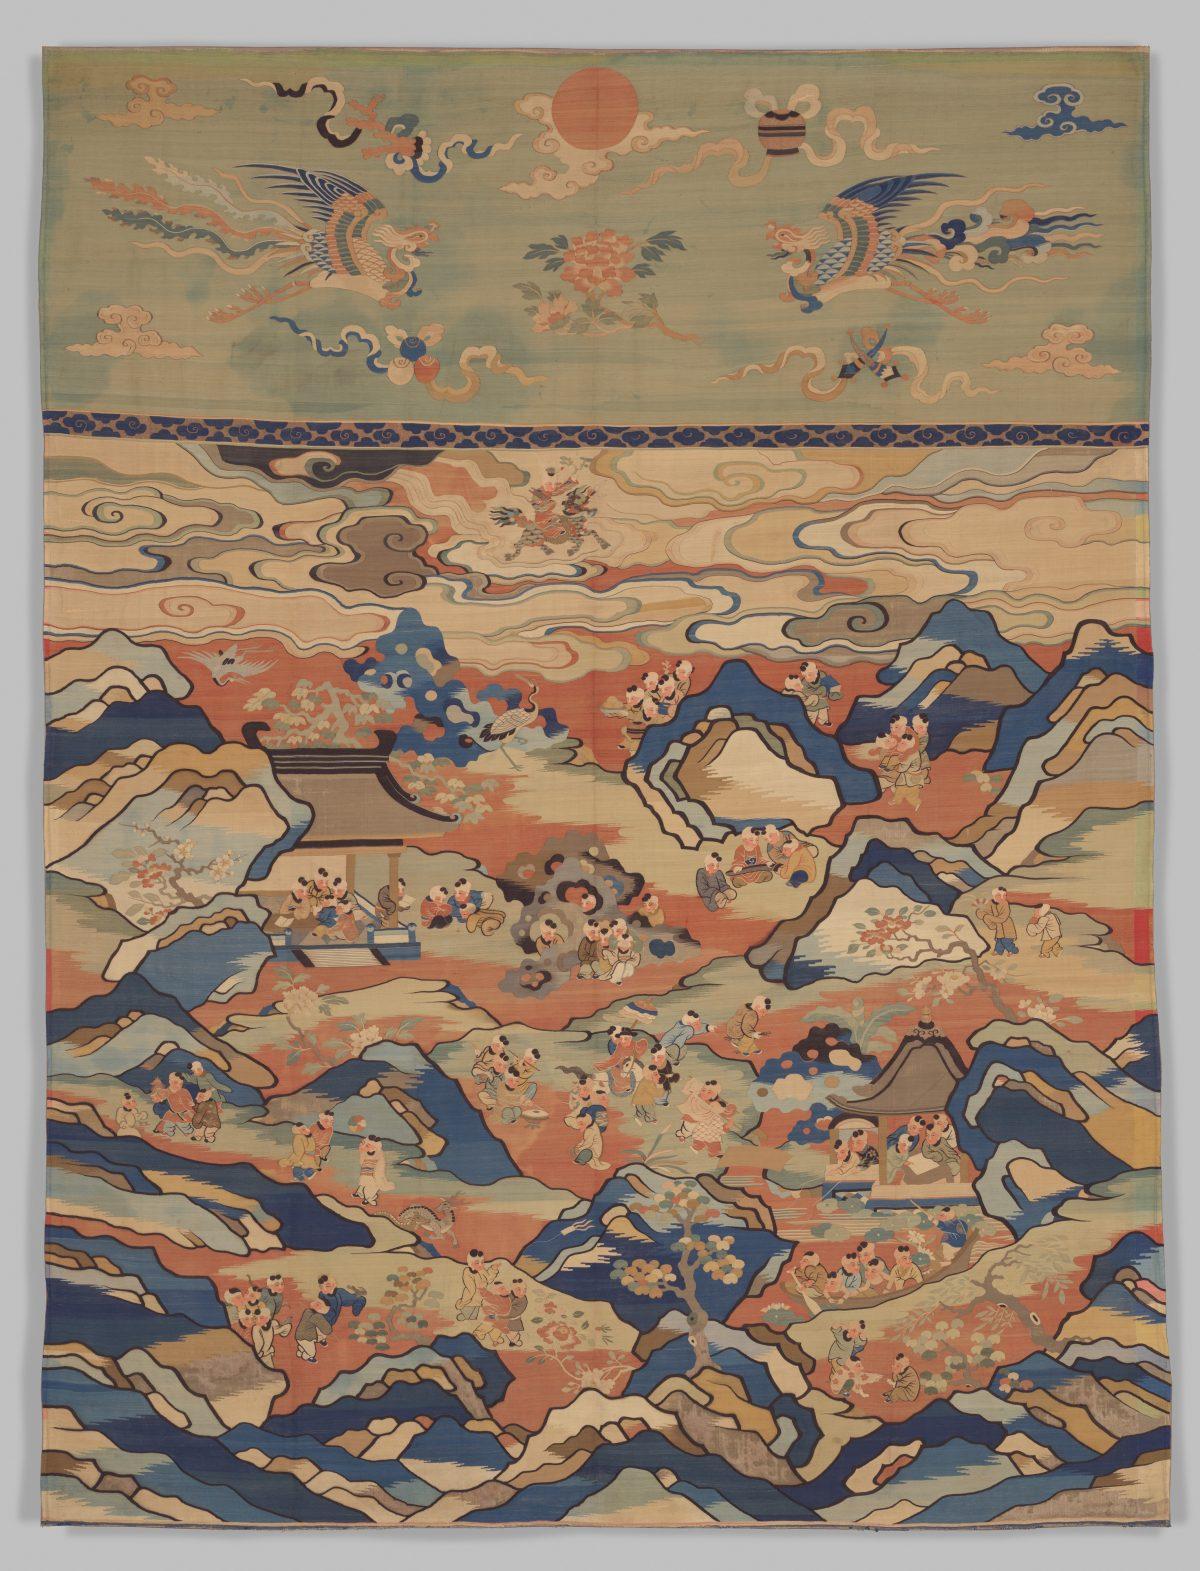 This large silk tapestry features dozens of children at play, engaging in archery, boating, falconry, fishing, horseback riding, and other leisure activities. Qing Dynasty (1644–1911), dated 17th century. Purchase, The Vincent Astor Foundation Gift, 2011. (The Metropolitan Museum of Art)